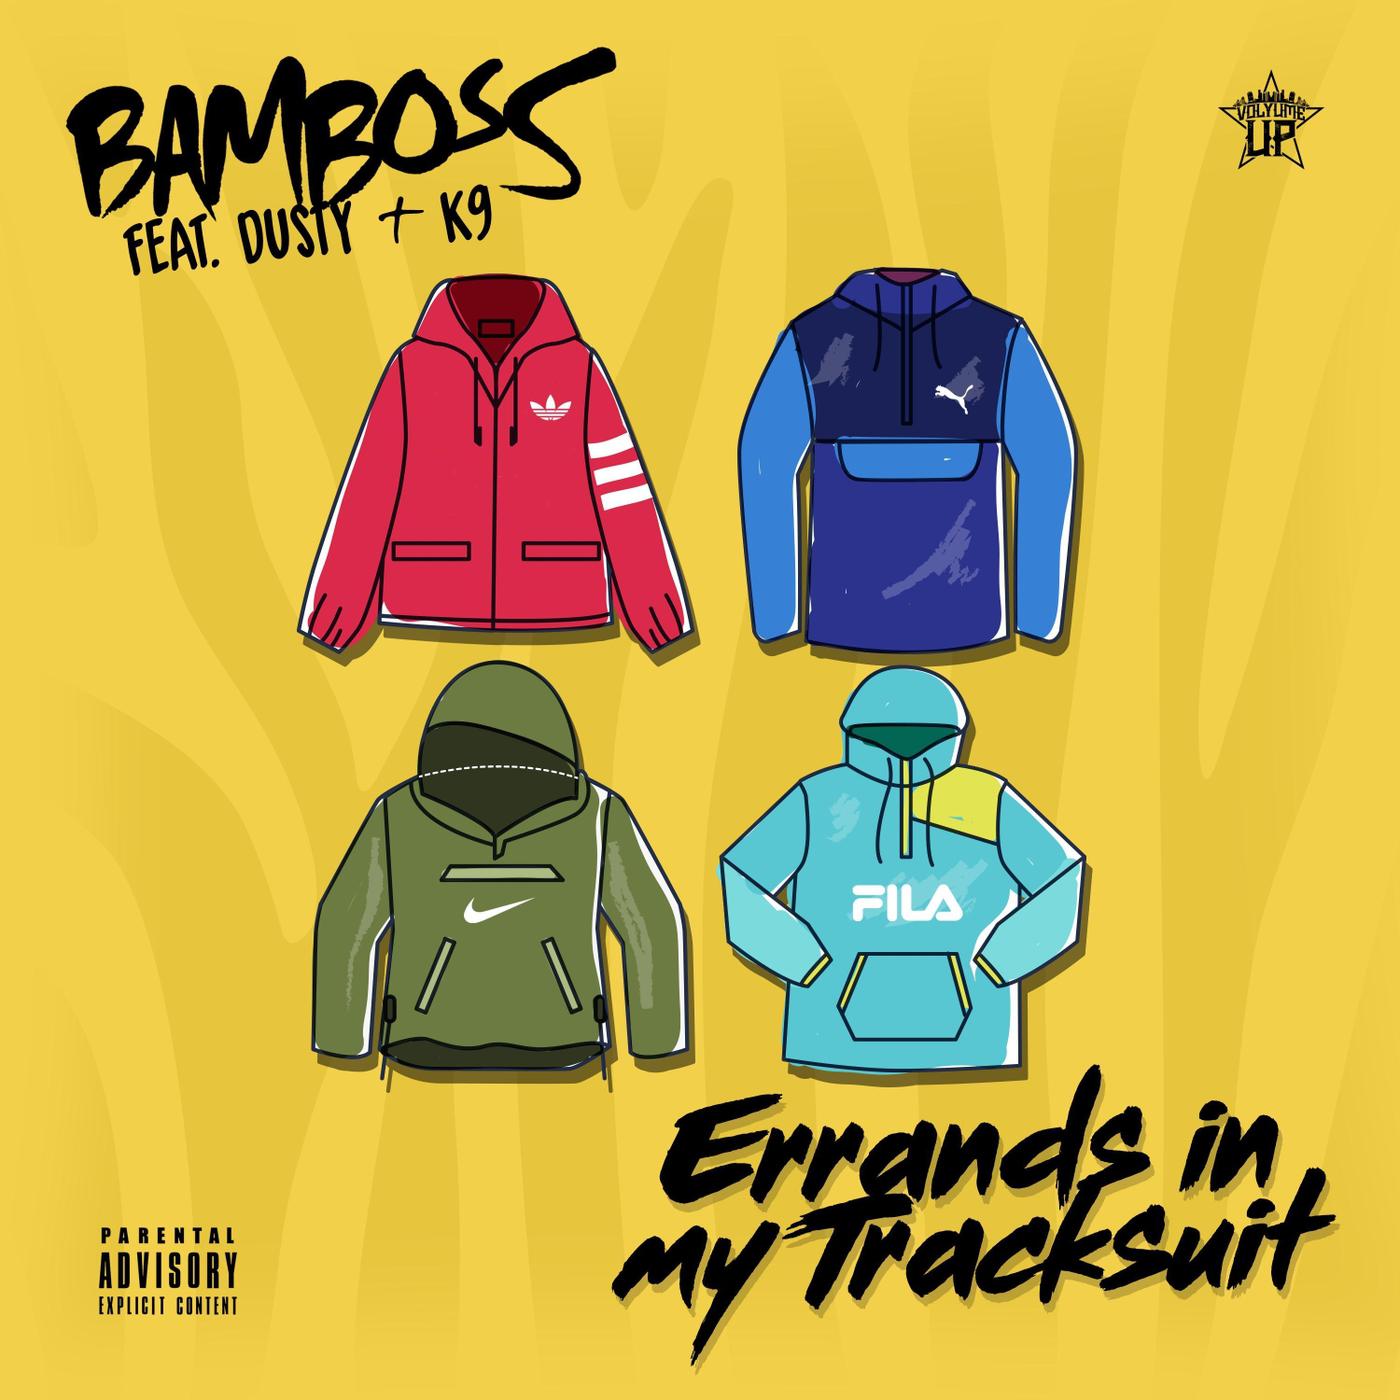 Bamboss - Errands in My Tracksuit